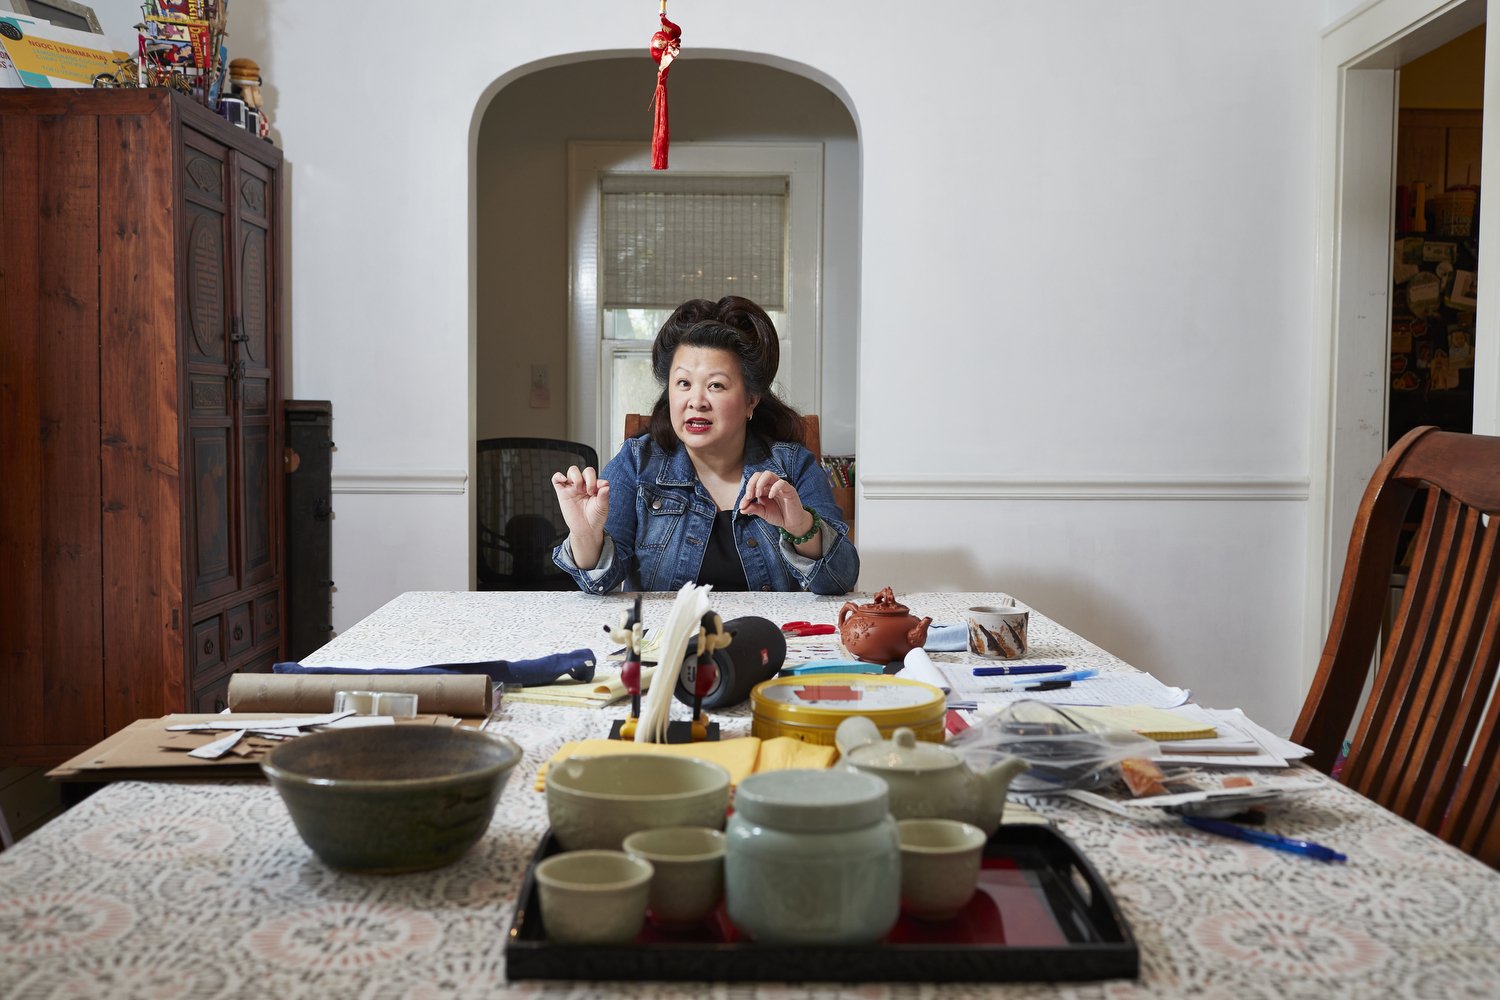  Ngoc Huynh at her home in Syracuse, N.Y. on May 17, 2020. Huynh is opening a Vietnamese restaurant in the new Salt City Market set to open later this year. CREDIT: Mustafa Hussain for The New York Times 